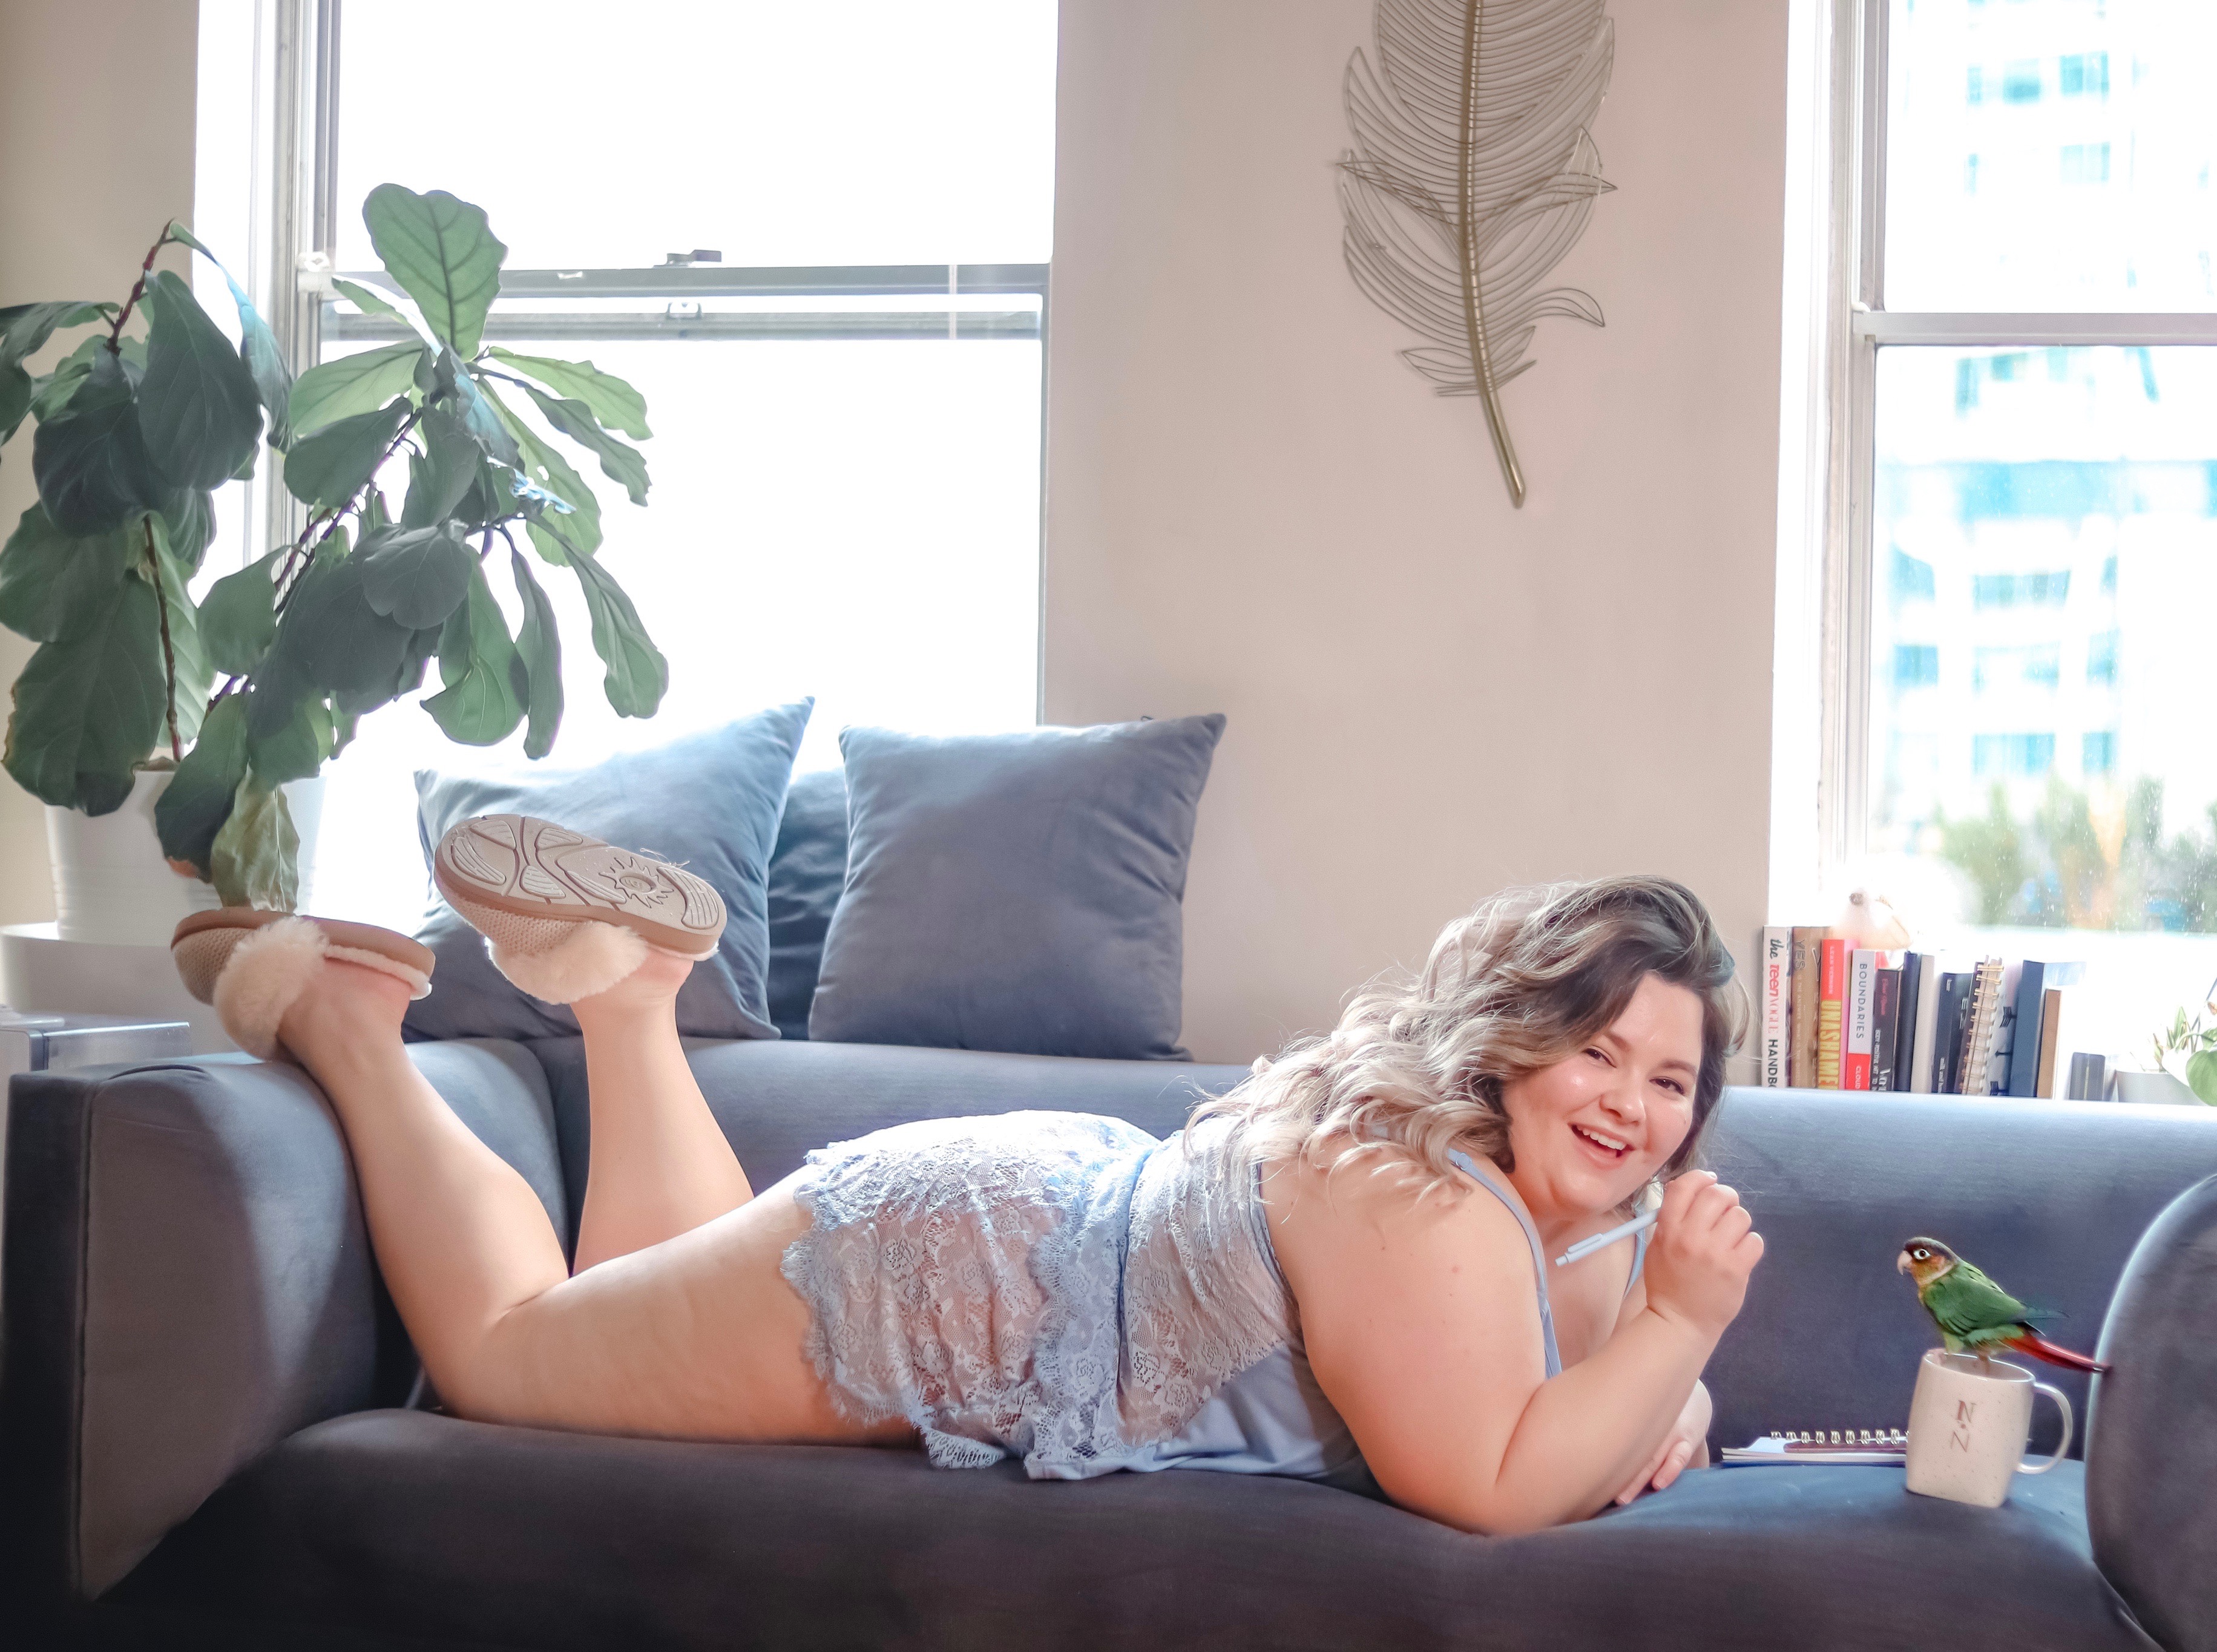 Chicago Plus Size Petite Fashion Blogger, influencer, and model Natalie in the City Craig reviews Adore Me lingerie.